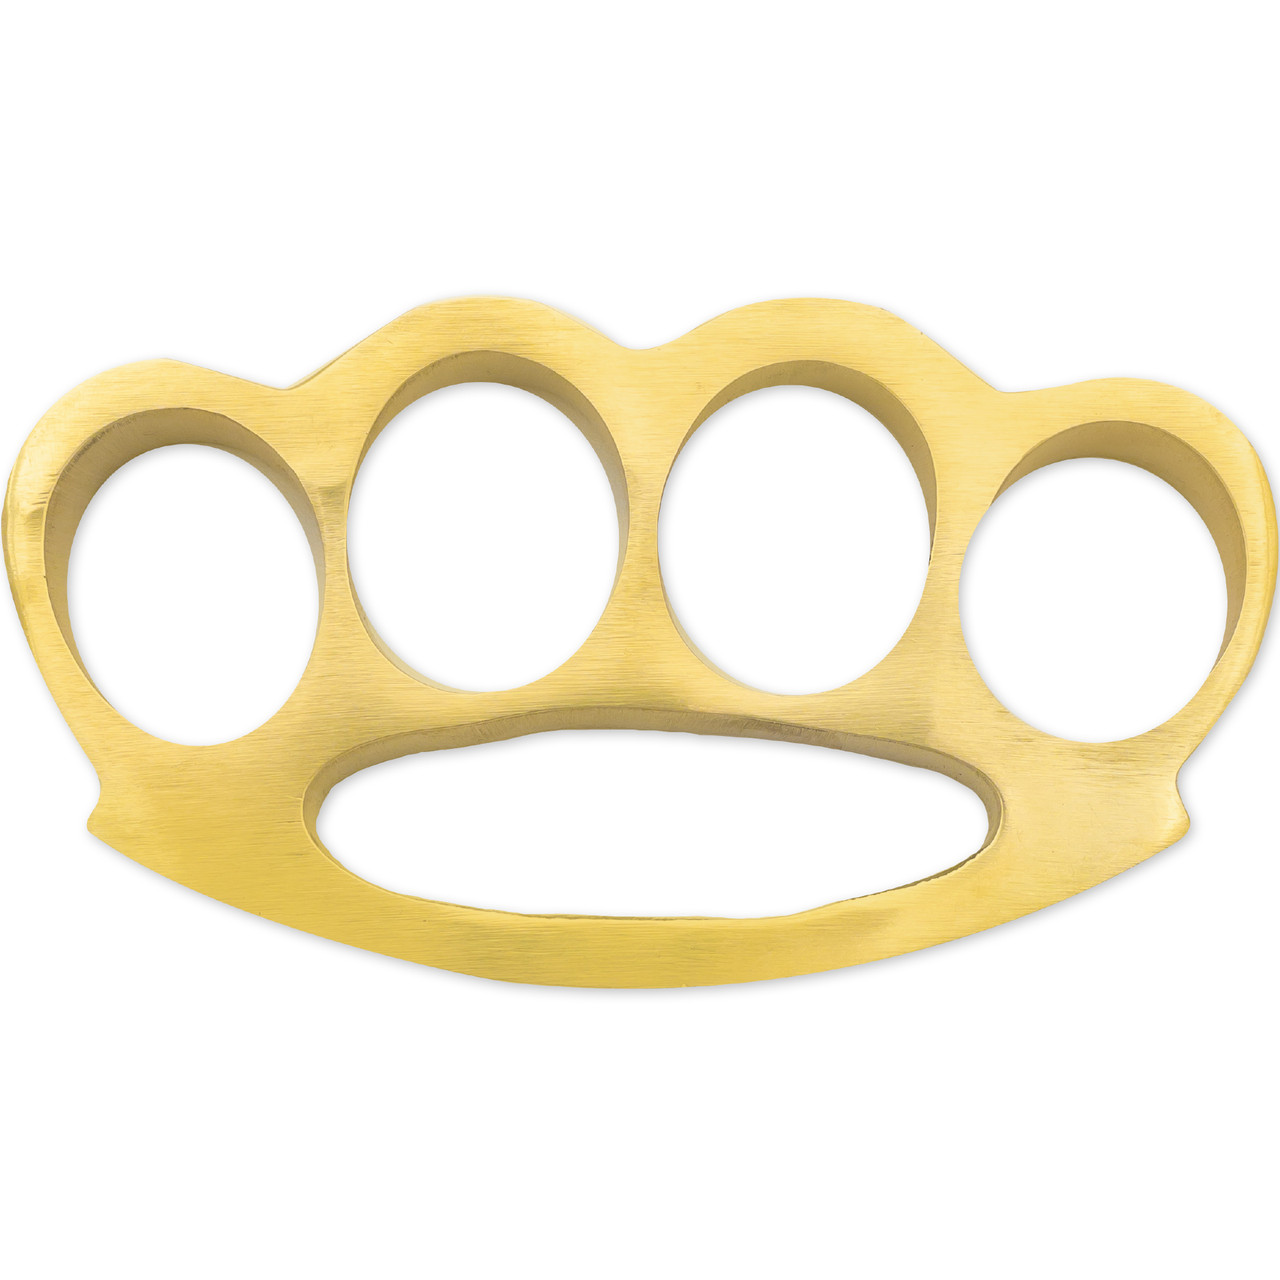 Stories About Brass Knuckle Protection | Dig Different